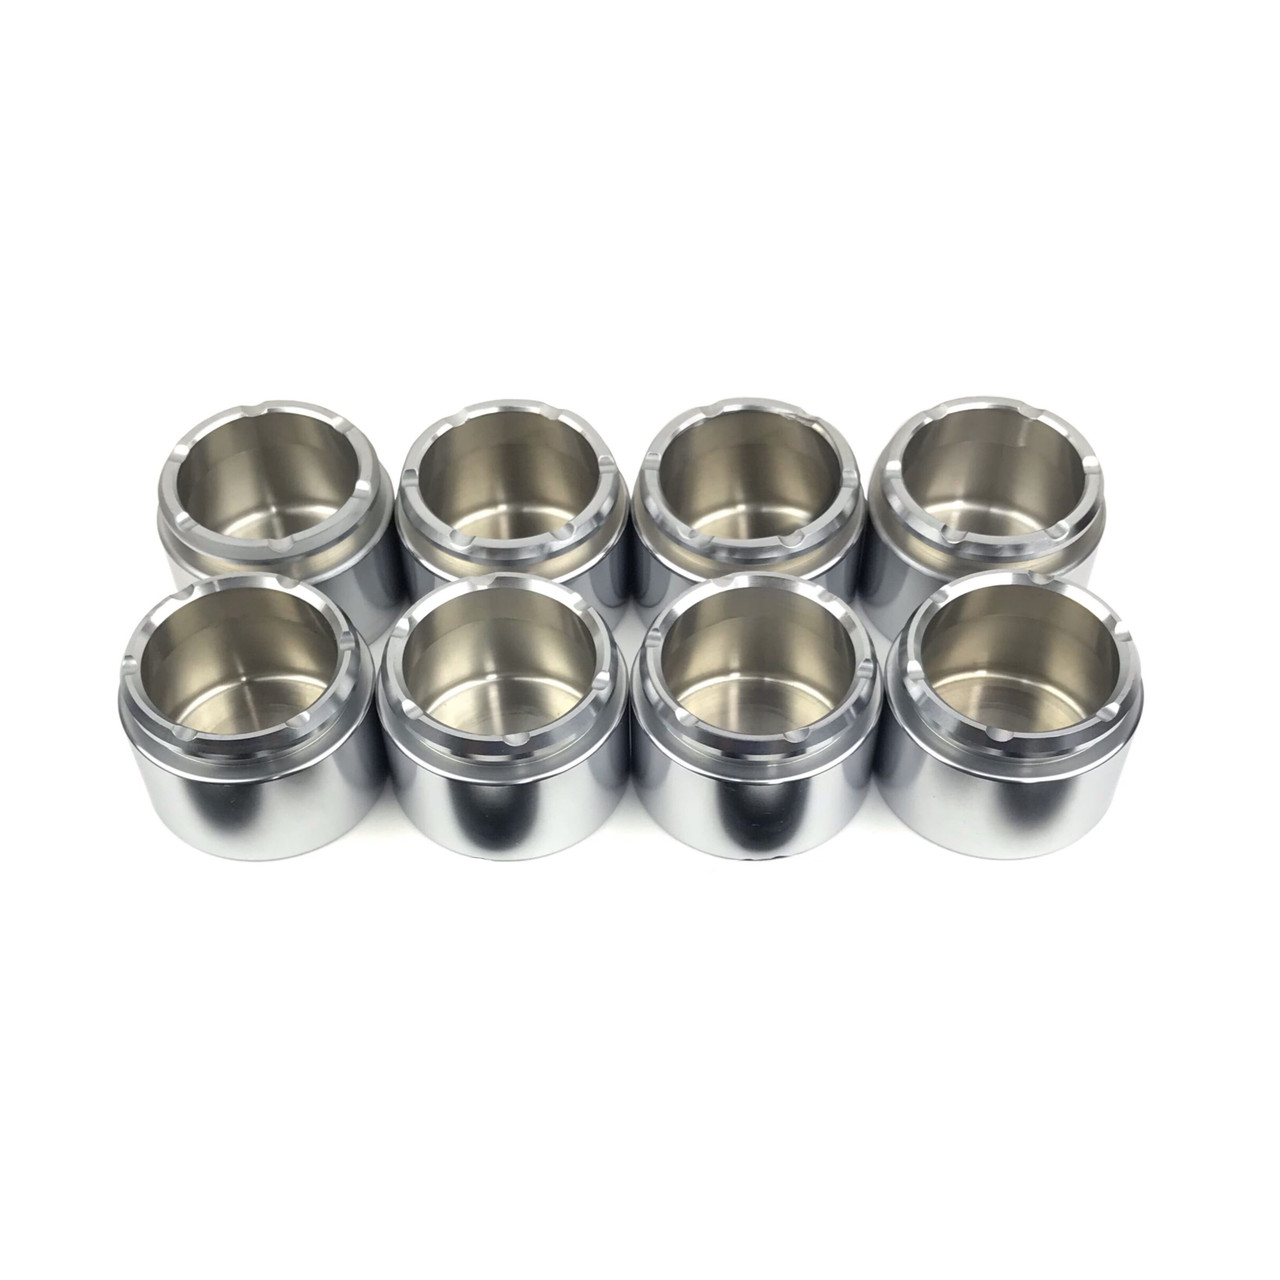 SS Piston Kit Piston Kit for Porsche 996 C4 Turbo, 996 C4S, 996 GT2/GT3, 996 Turbo, 997.1 C2 Turbo, 997.1 C4 Turbo, 997.1 C4S, 997.2 C2S, 997.2 C4S, 987 Boxster S, 987/718 Cayman S/GTS Pccb (yellow) or iron (Red) calipers (Price is for 2 Calipers)